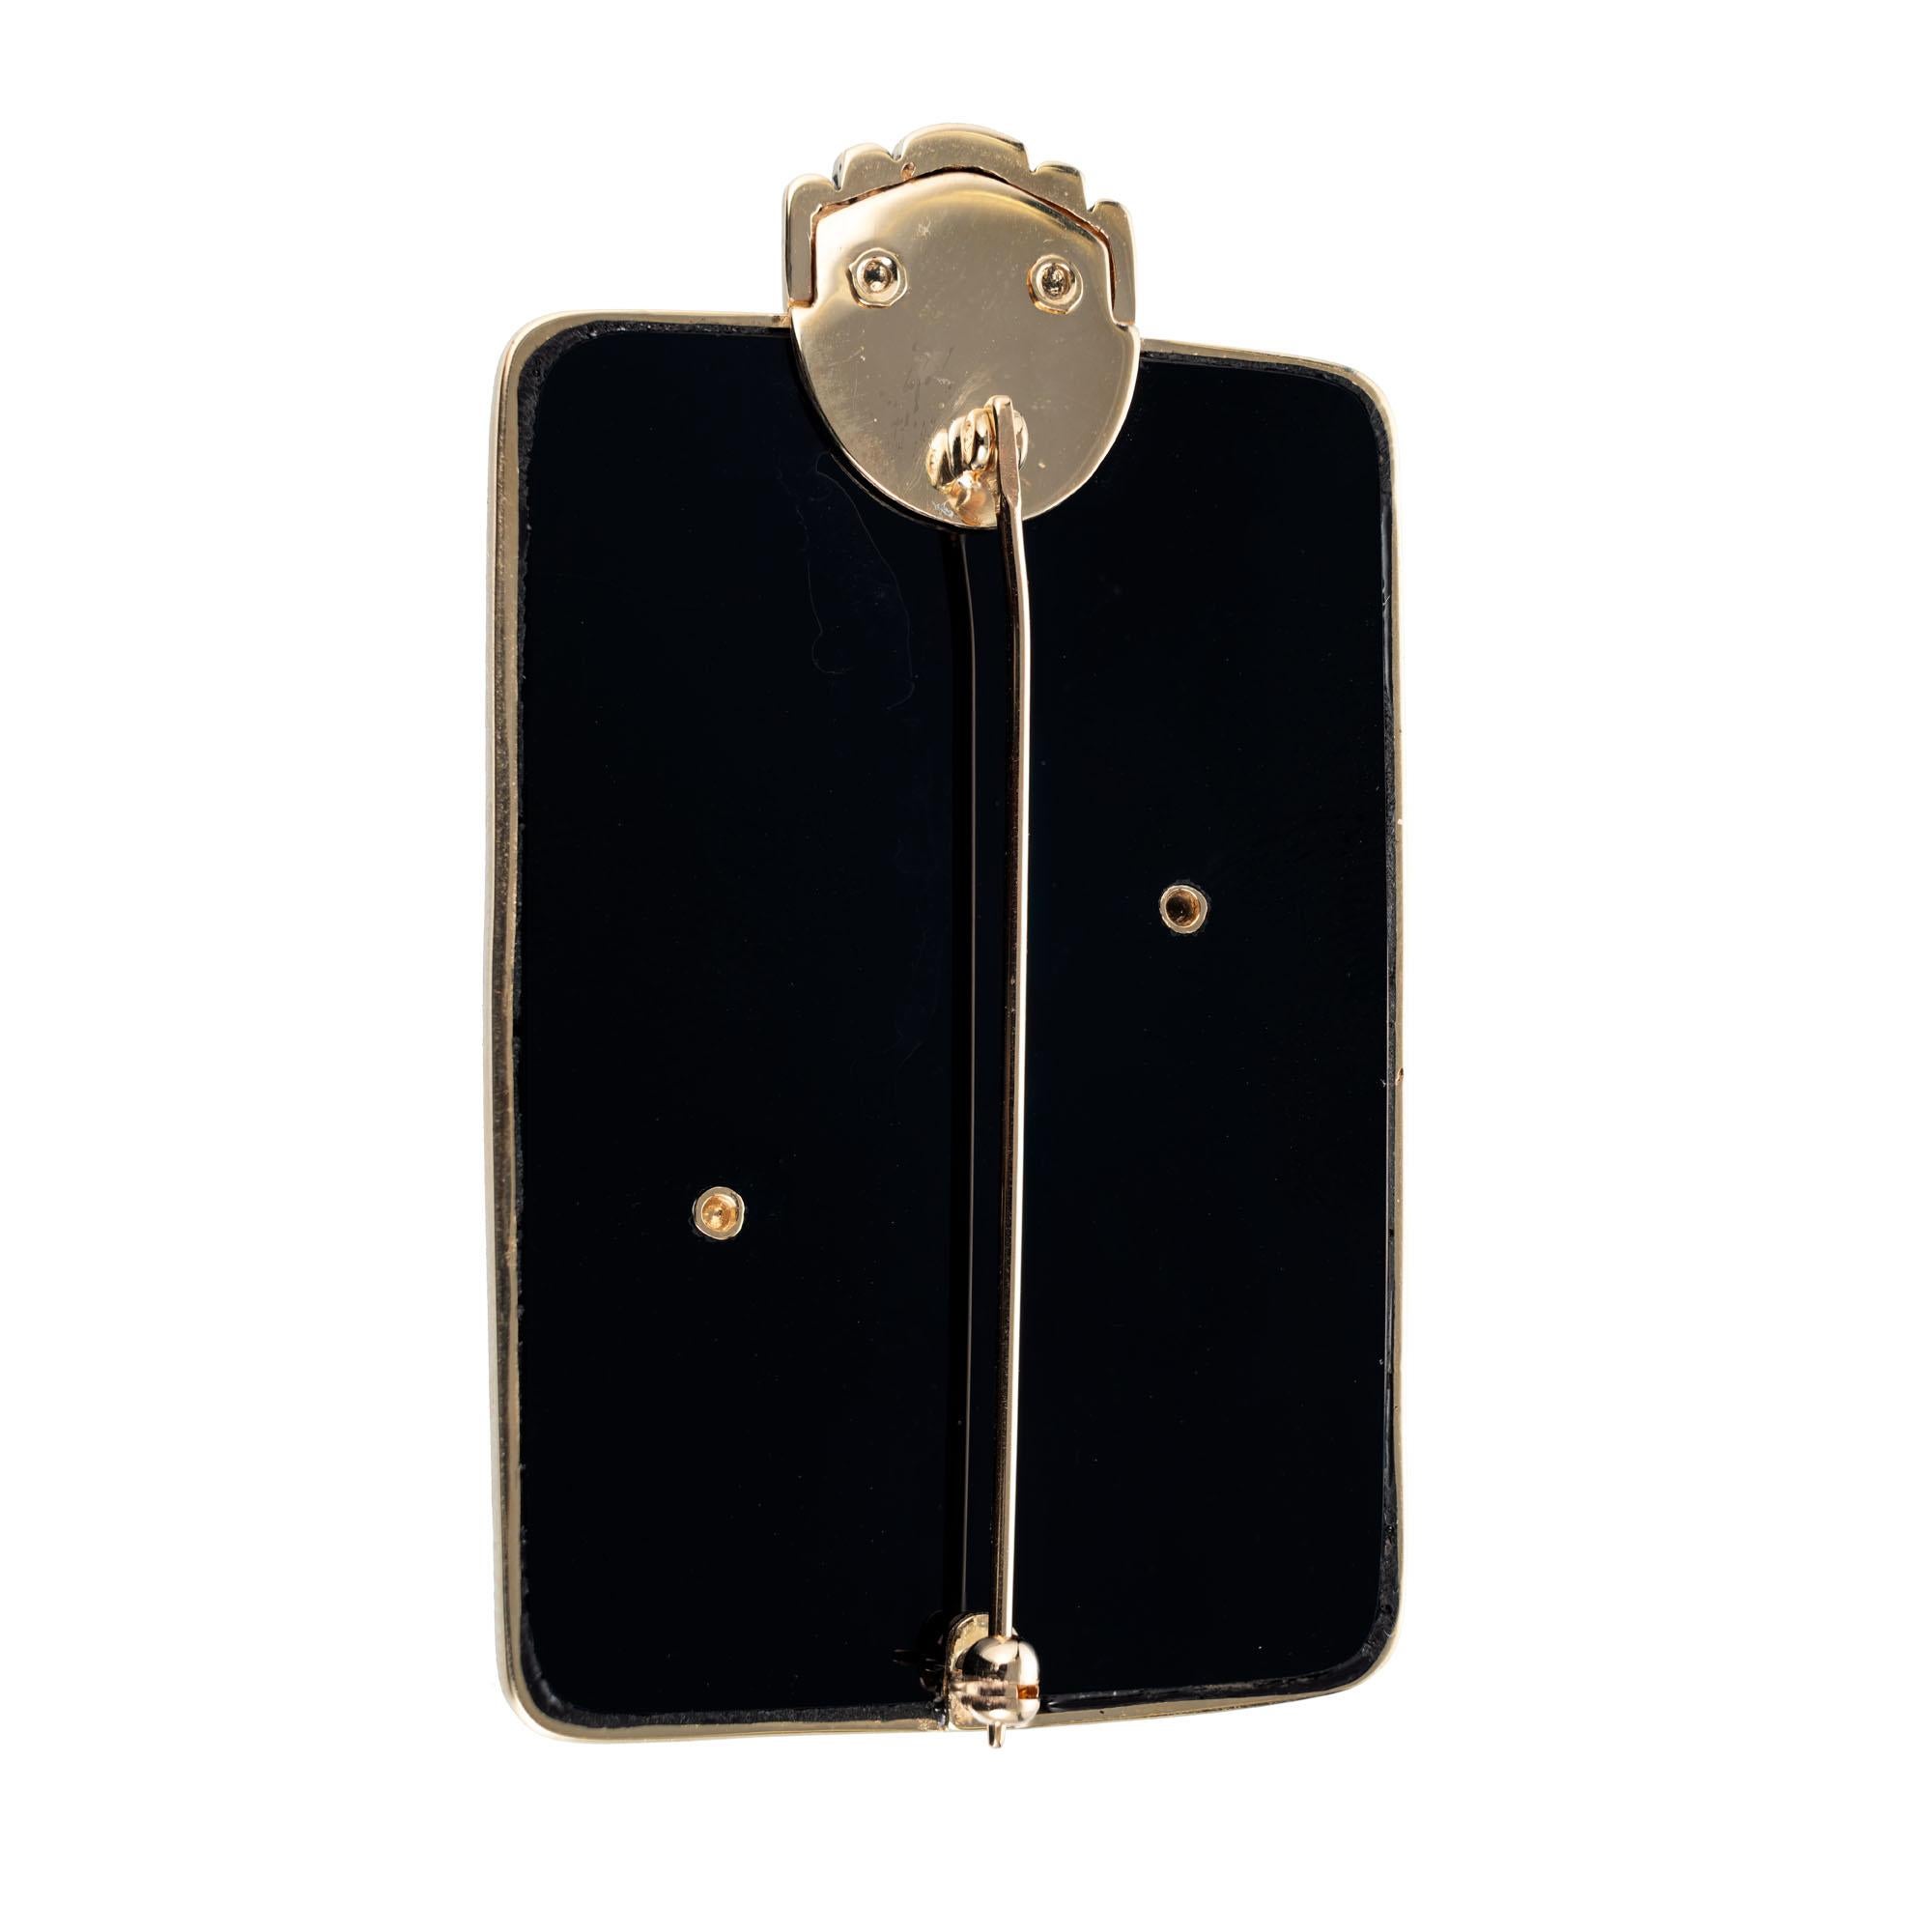 Art to Wear letter A brooch made of 14k yellow gold and black onyx frame with 39 round single cut accent diamonds made by Circle Fine Art, 1985.

20 round brilliant cut diamonds, H VS approx. .20cts
19 single cut diamonds, H VS approx. .10cts
14k